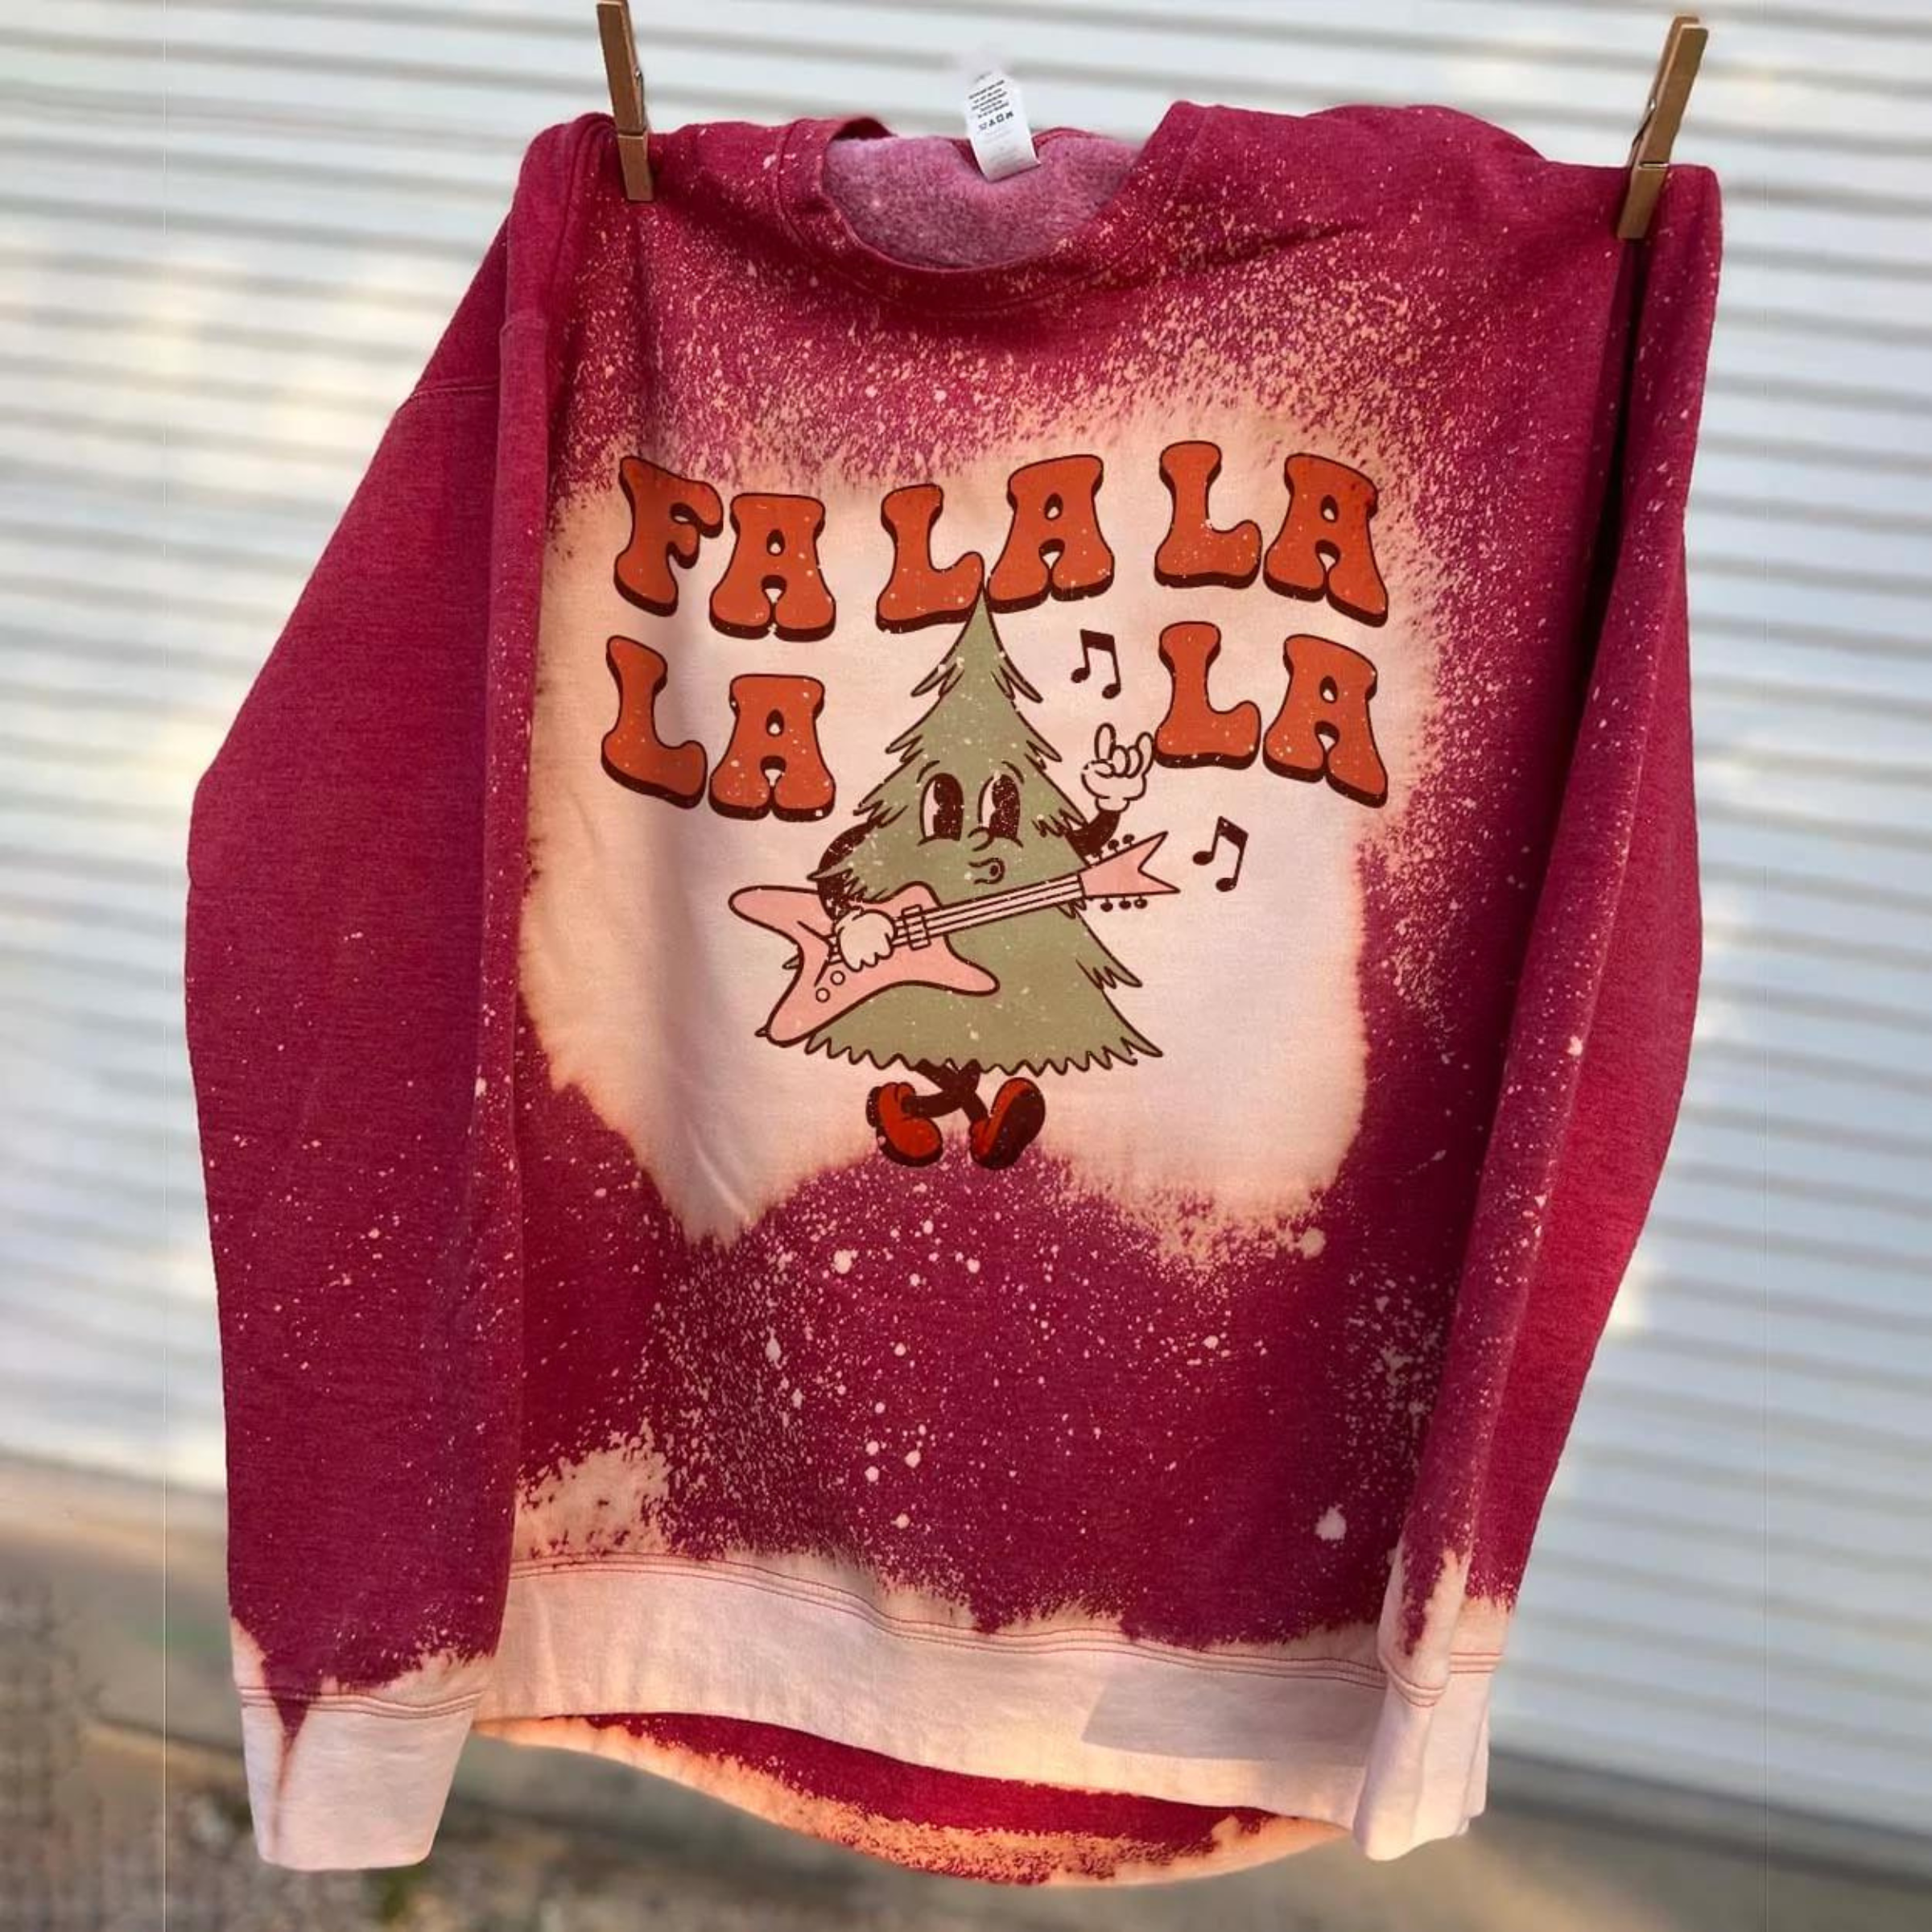 This bleached splatter graphic sweatshirt in red includes a crew neckline, long sleeves, and a graphic that says "Fa La La La La" in a cute font with a Christmas Tree playing a guitar and throwing up a rock on hand symbol. This sweatshirt is shown here hanging on a clothing line with clothespins. 